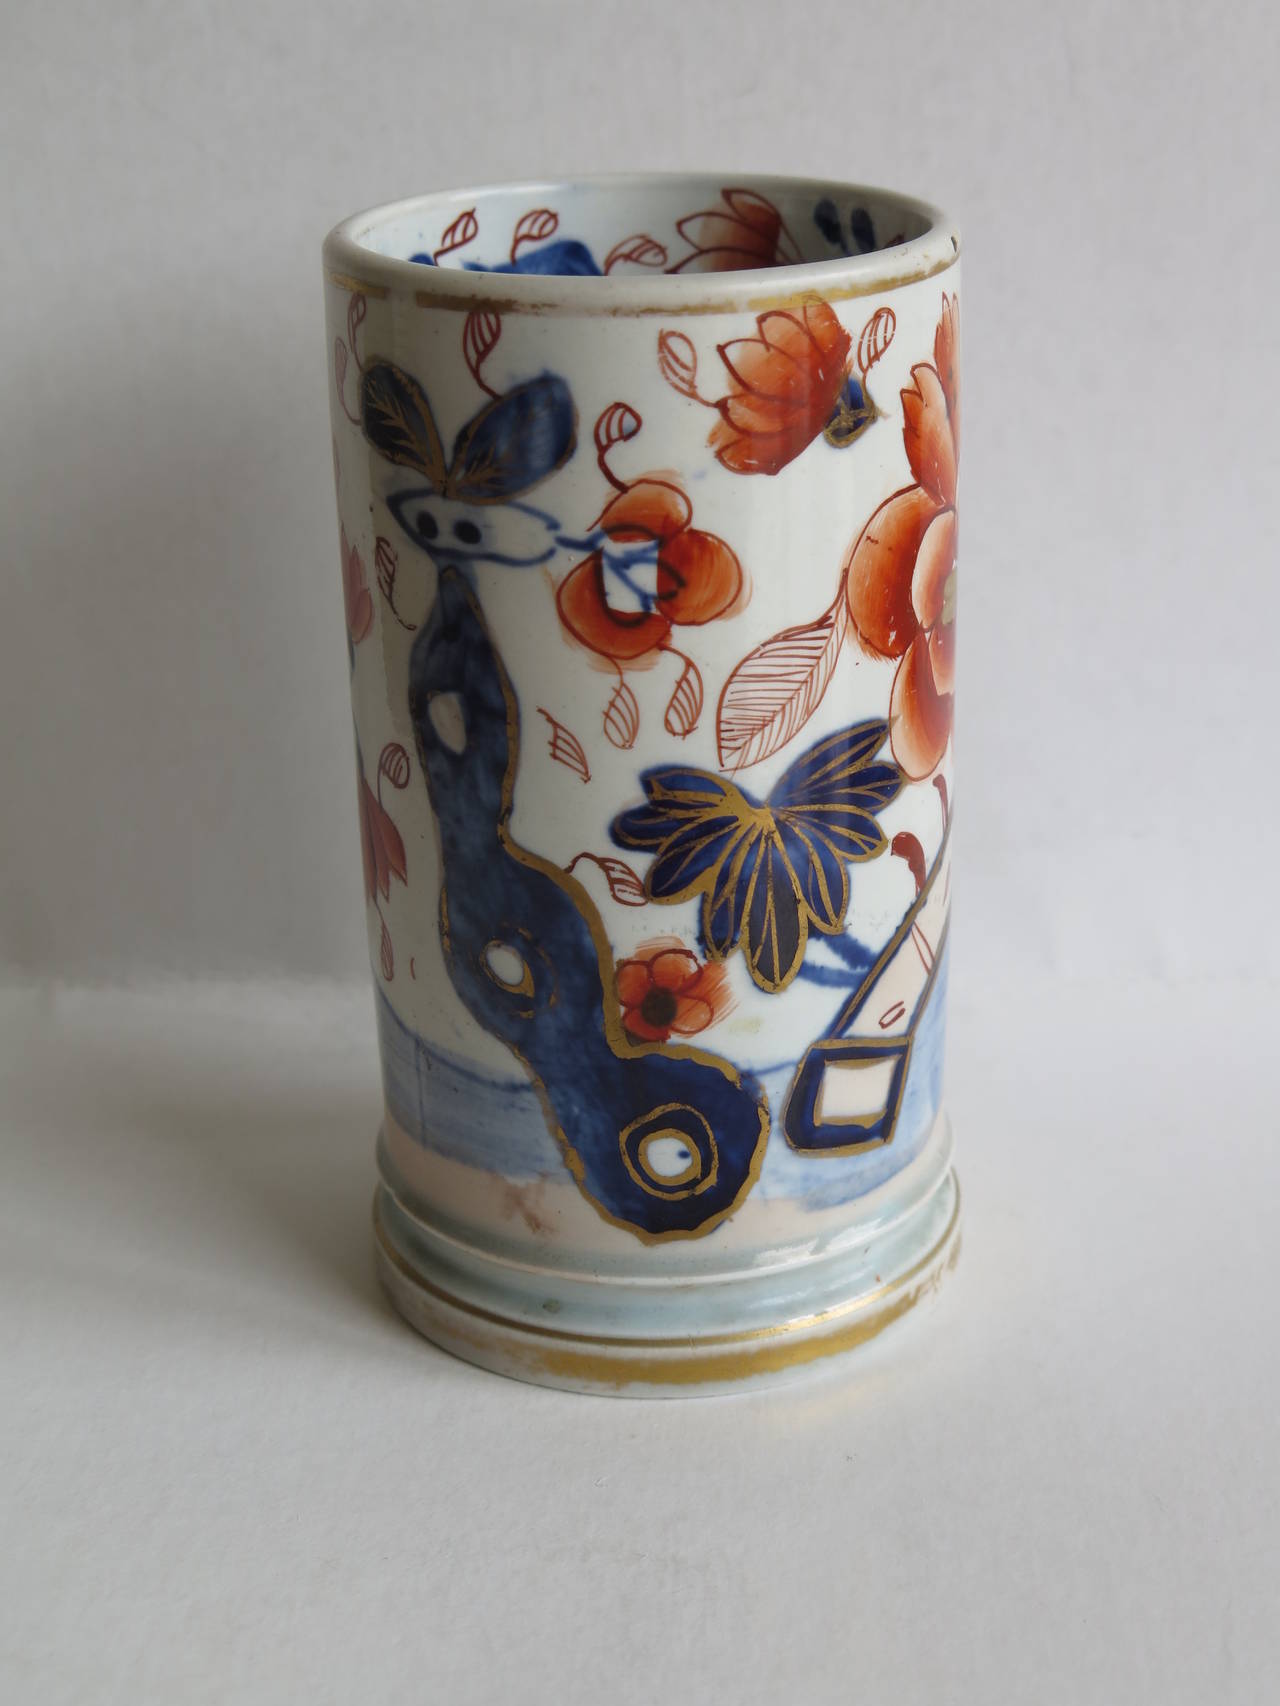 This is a RARE Ironstone SPILL VASE made by Mason's, Lane Delph, Staffordshire Potteries, England.

The vase is boldly decorated in the 